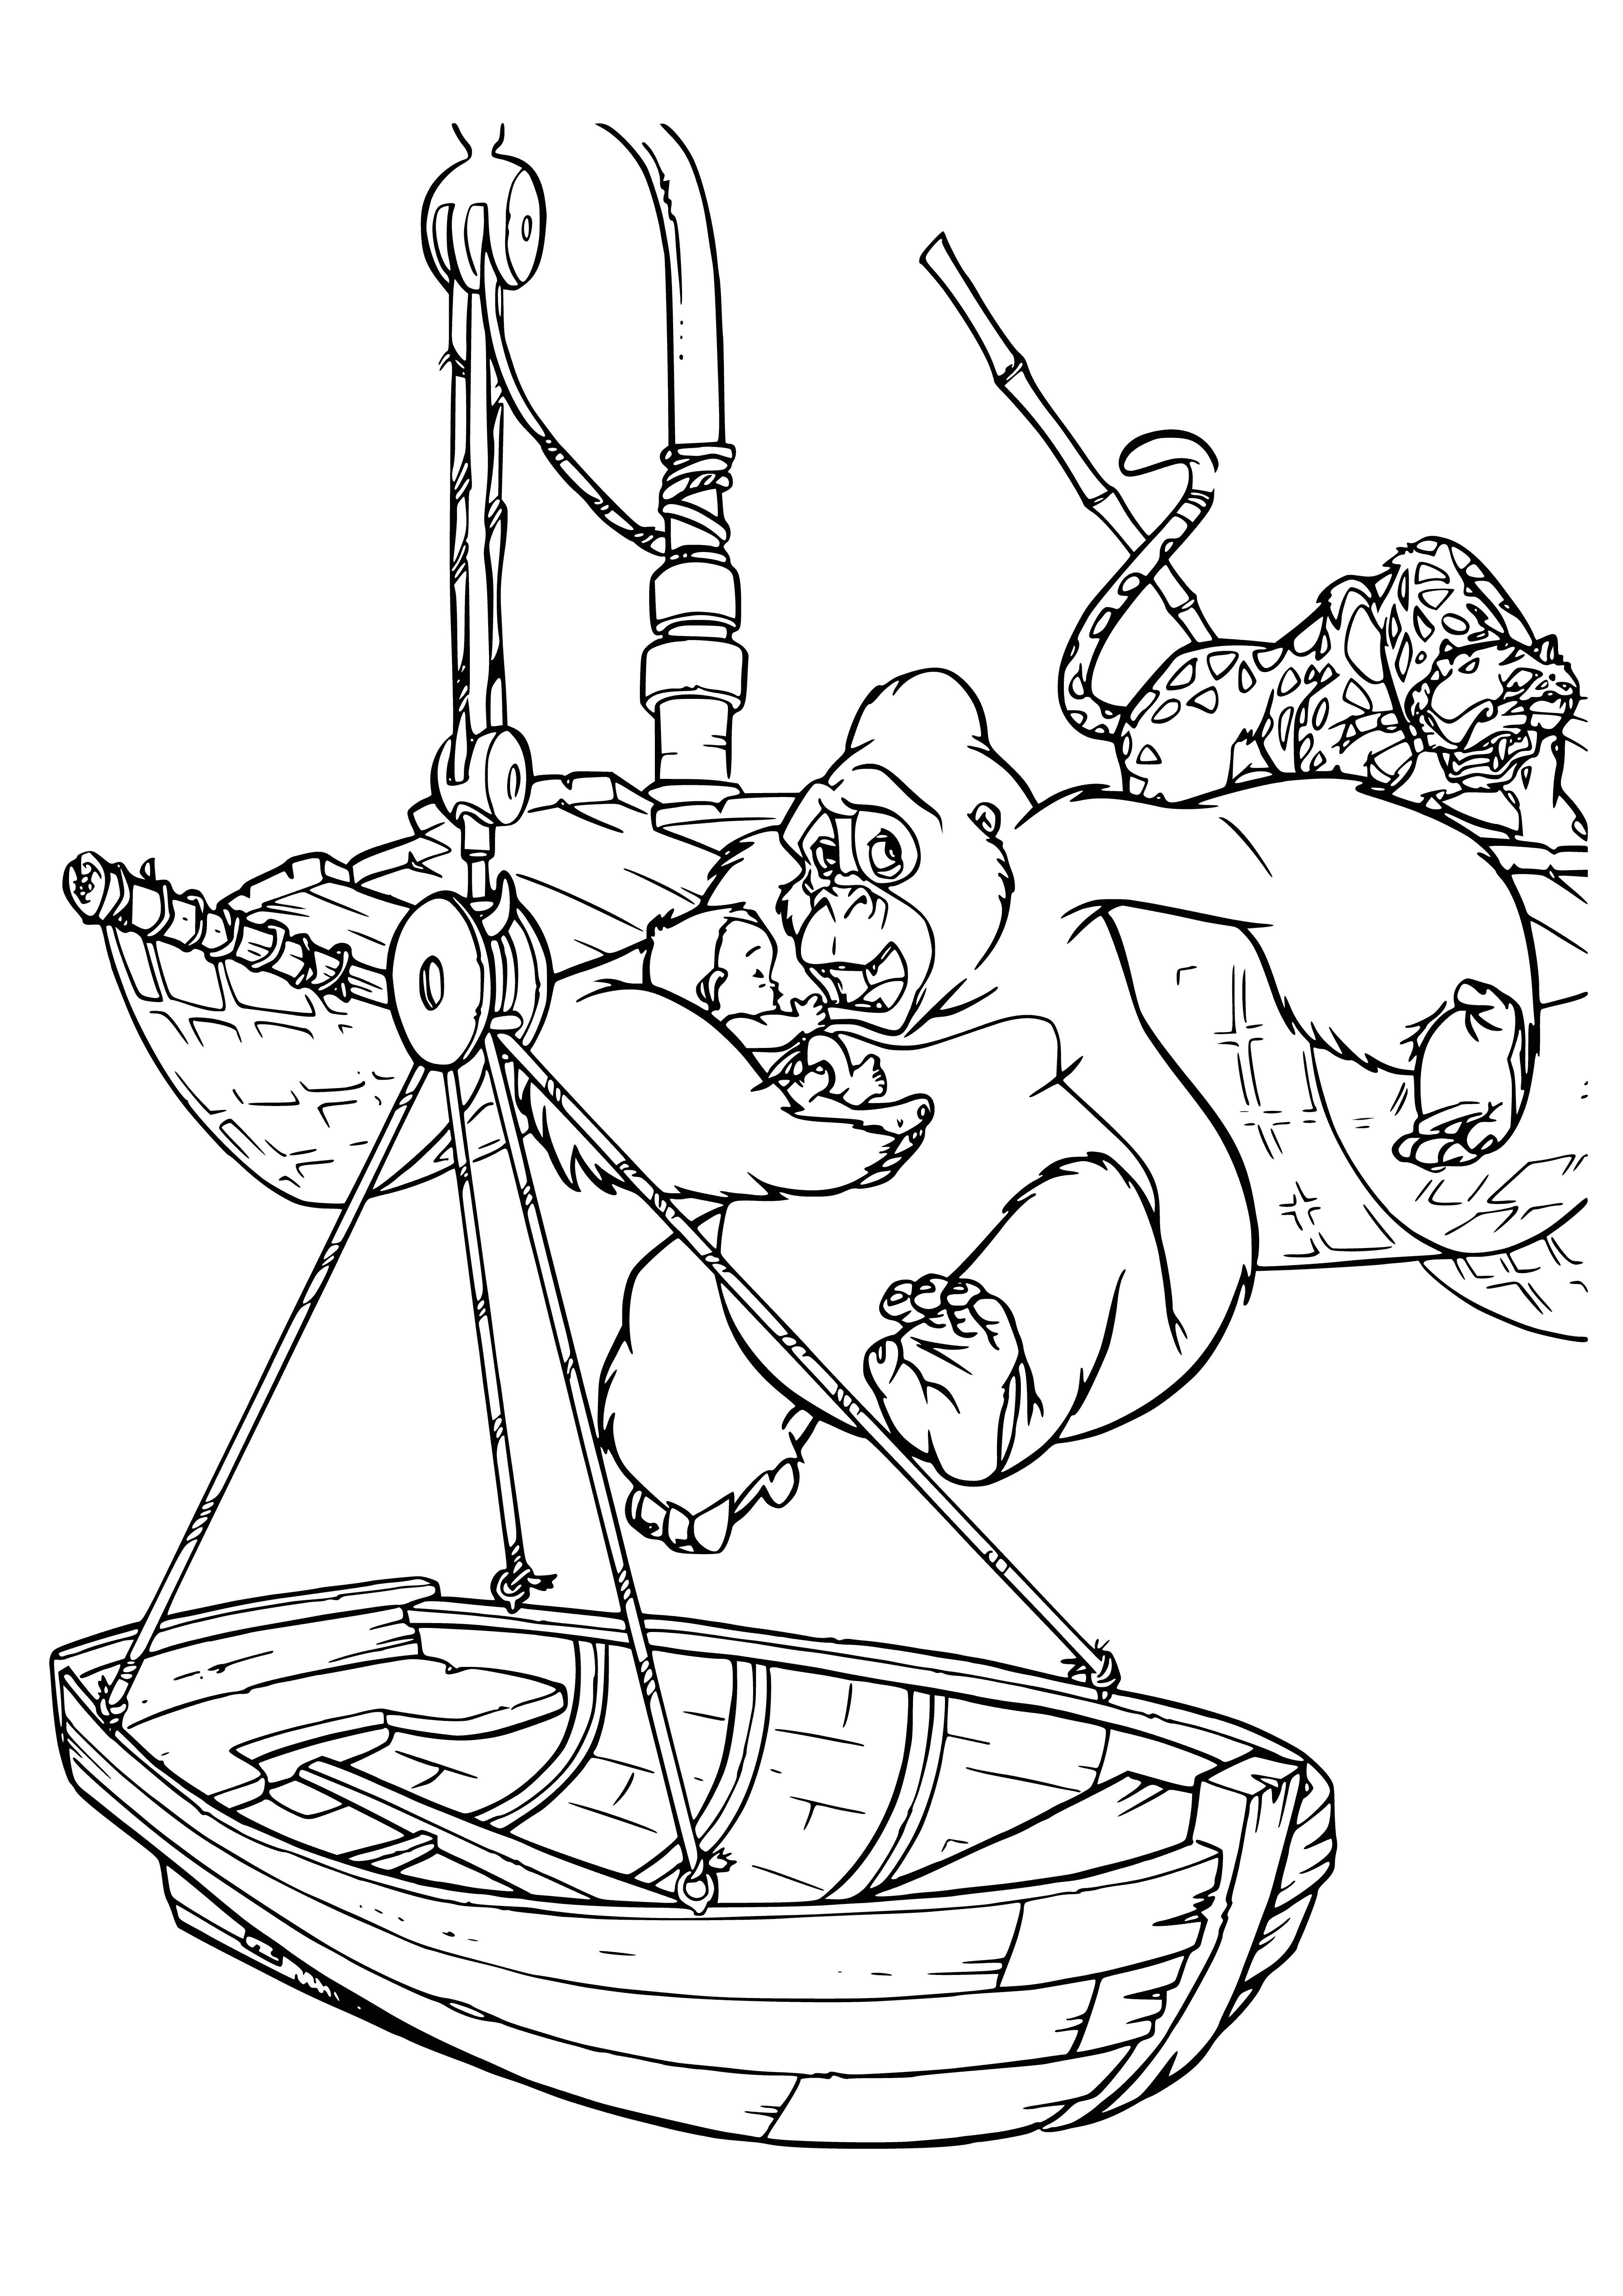 coloring page: A young man hangs from a vine above a river, while a woman reaches out from a tree branch to save him.